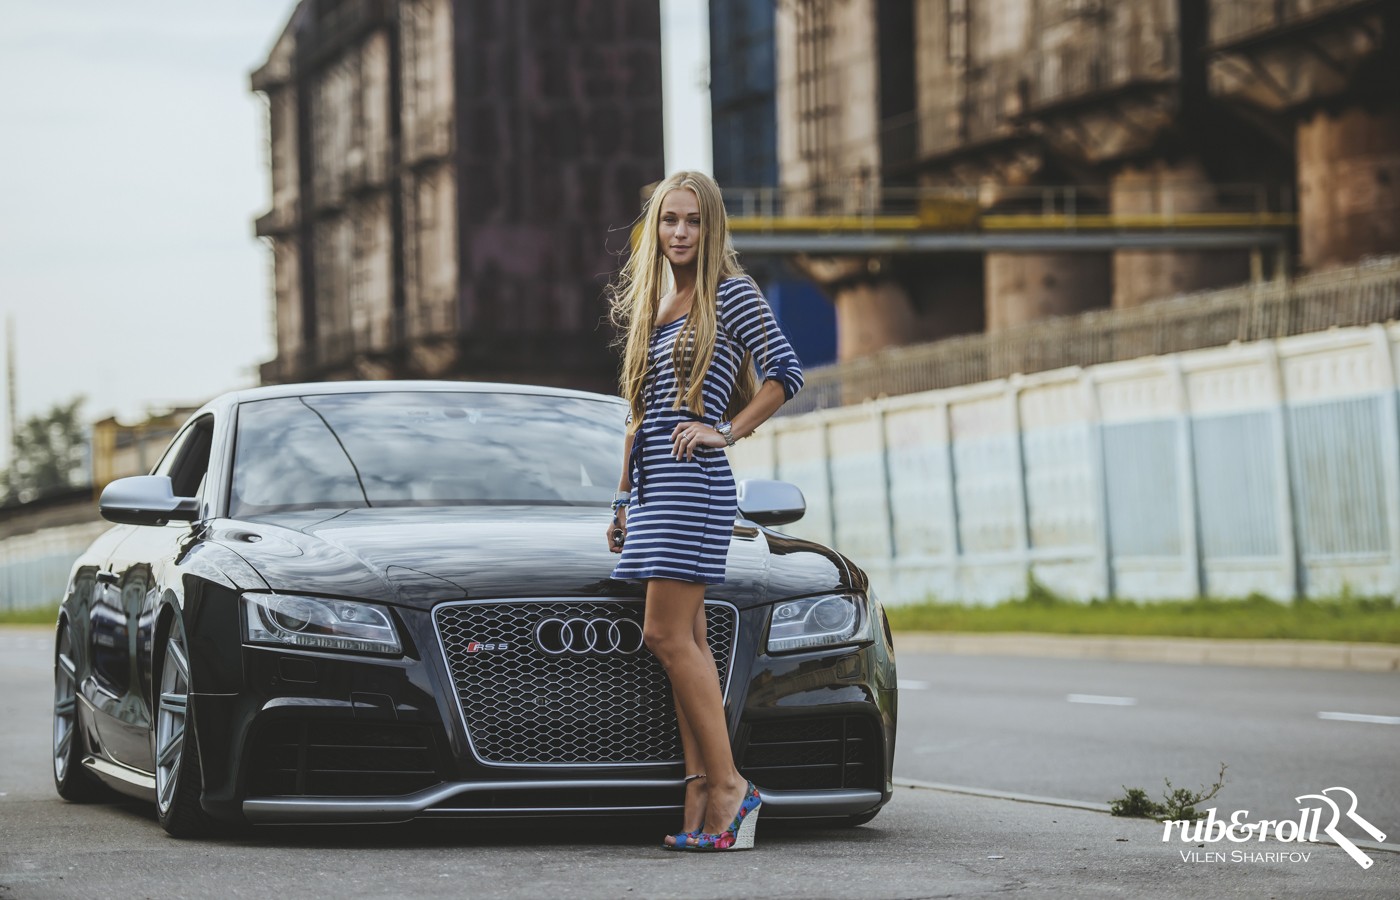 Audi Audi RS5 Women Women With Cars Blonde Long Hair Smiling Striped Clothing Hands On Hips Wedge He 1400x900